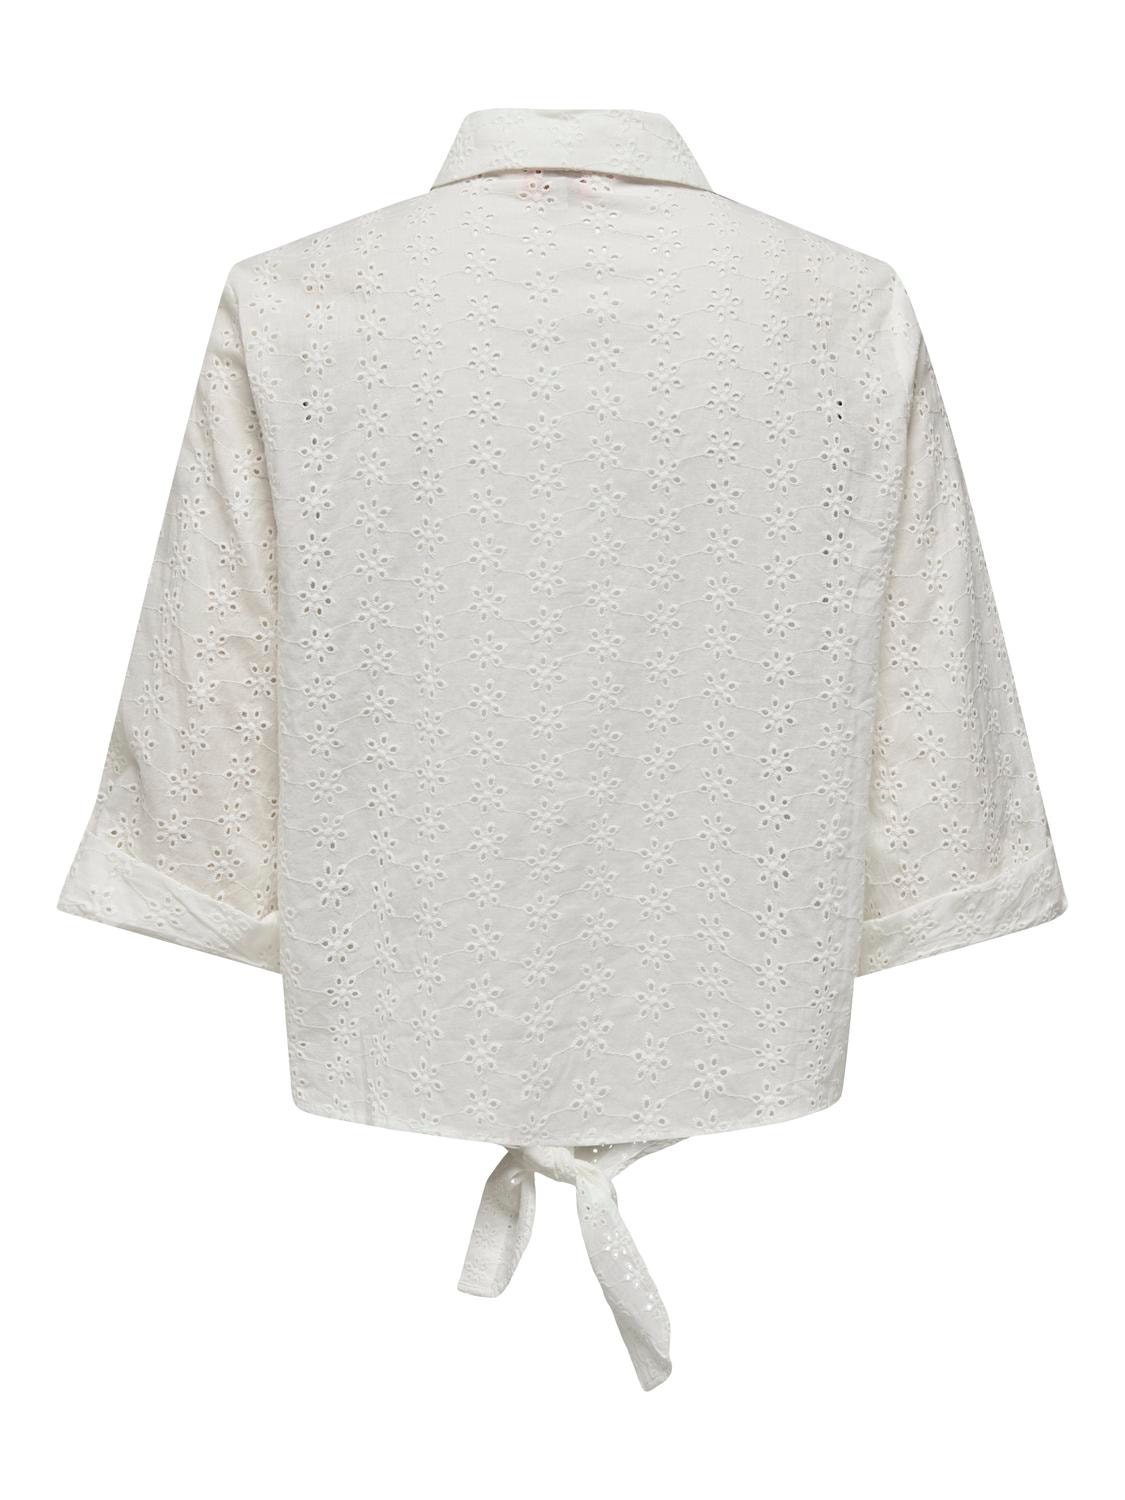 ONLY Shirt With Knot Detail -Cloud Dancer - 15291402